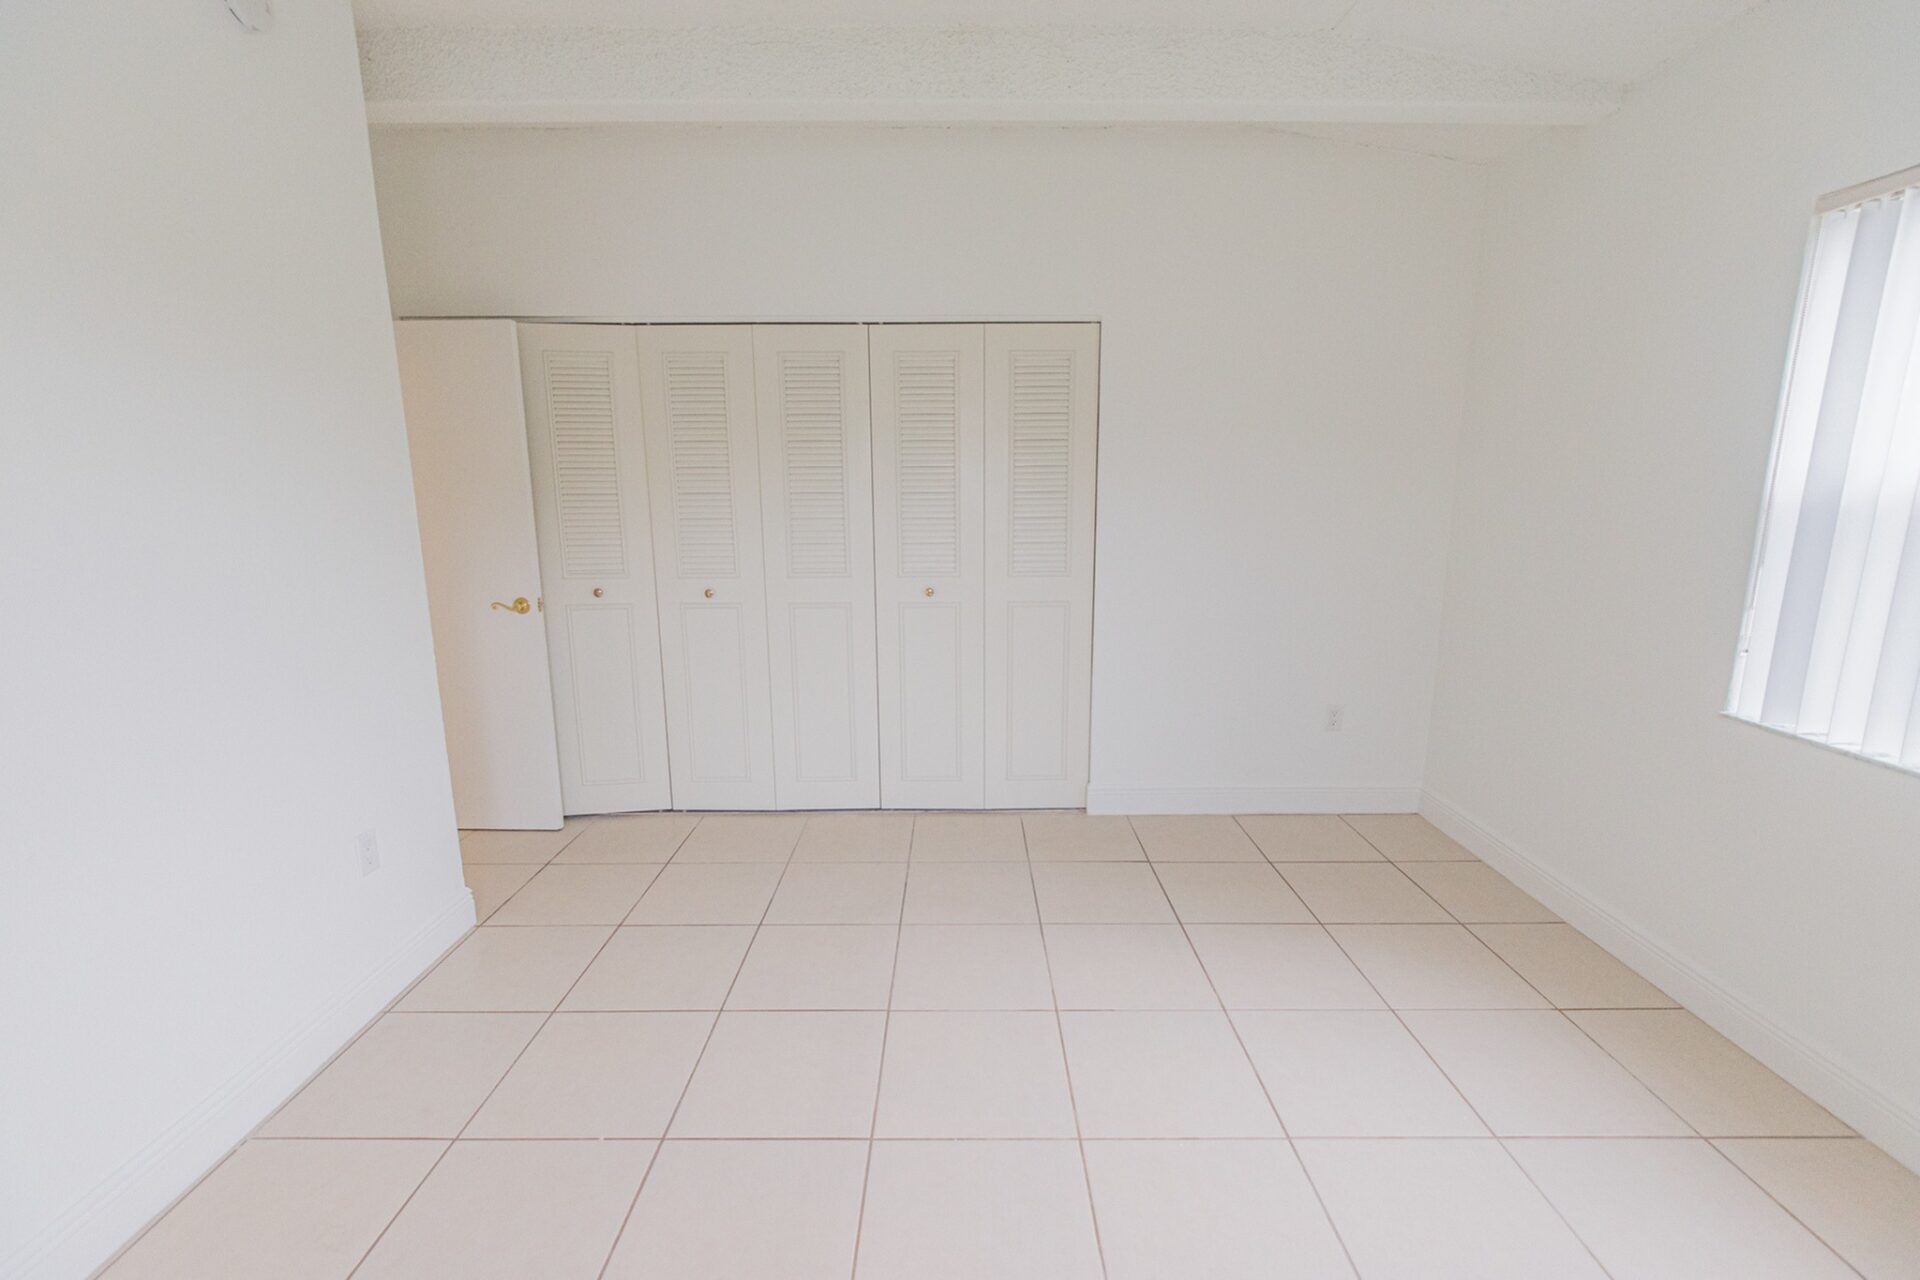 Spacious area with a closet and a window in an apartment at Green Briar West.